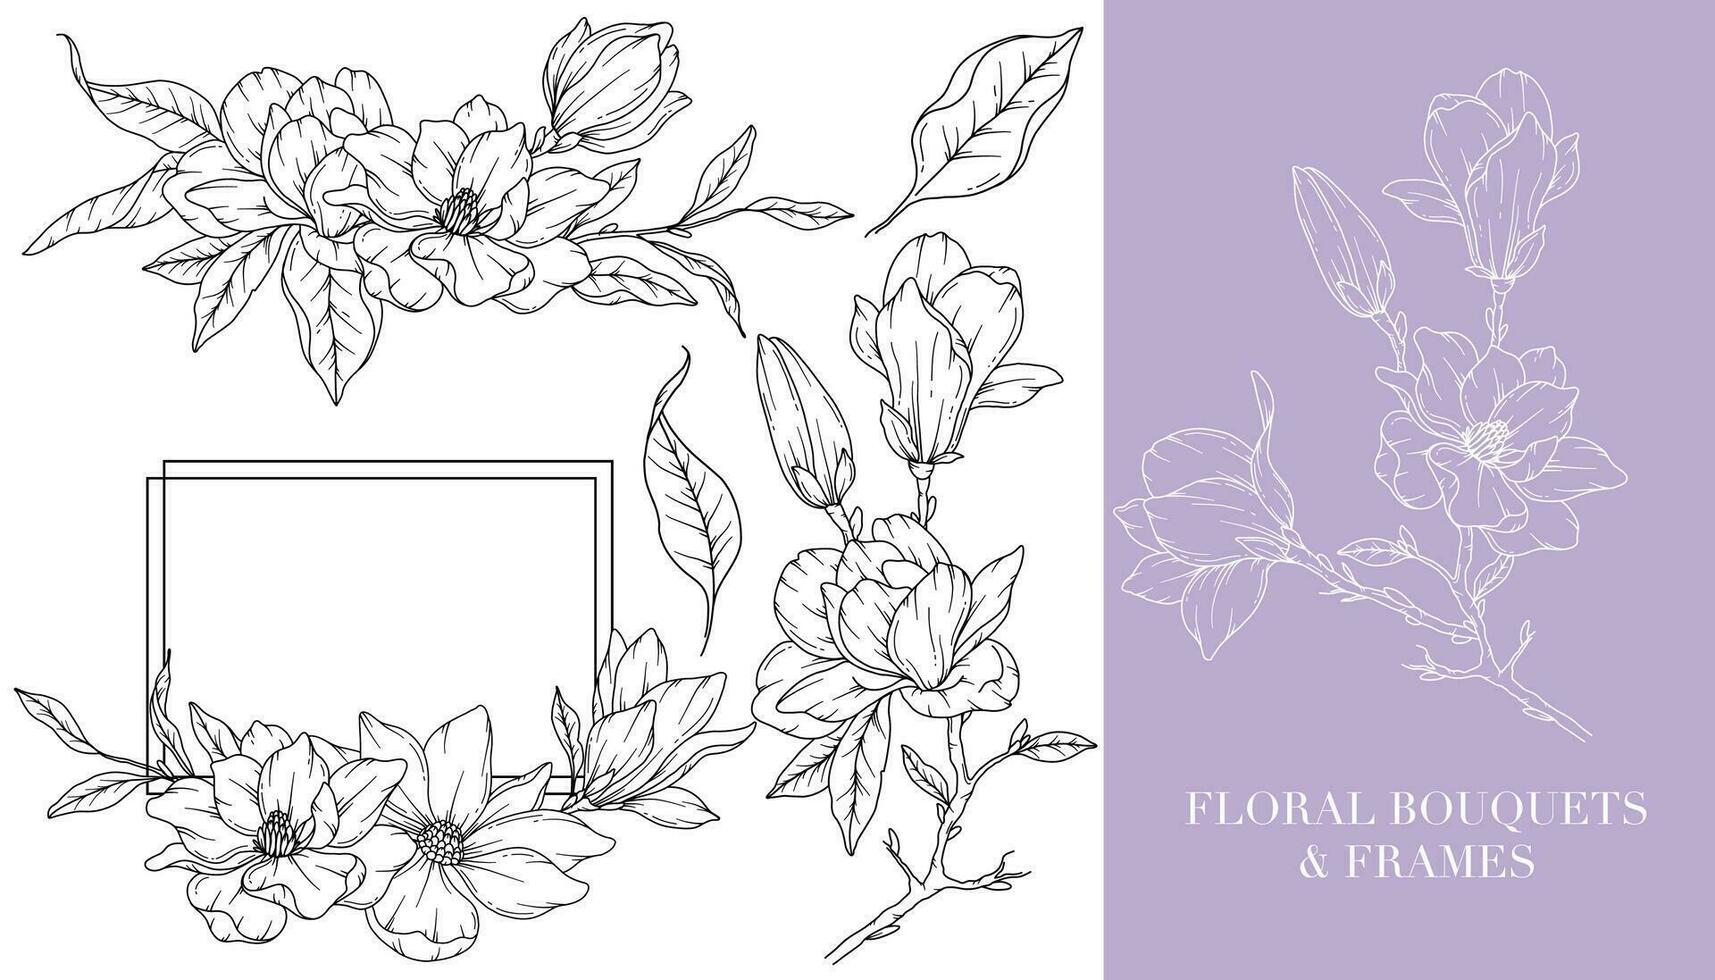 Magnolia Line Drawing. Floral Frames and Bouquets. Floral Line Art. Fine Line Magnolia Frames Hand Drawn Illustration. Hand Drawn Outline Magnolias. Botanical Coloring Page. Magnolia Isolated vector